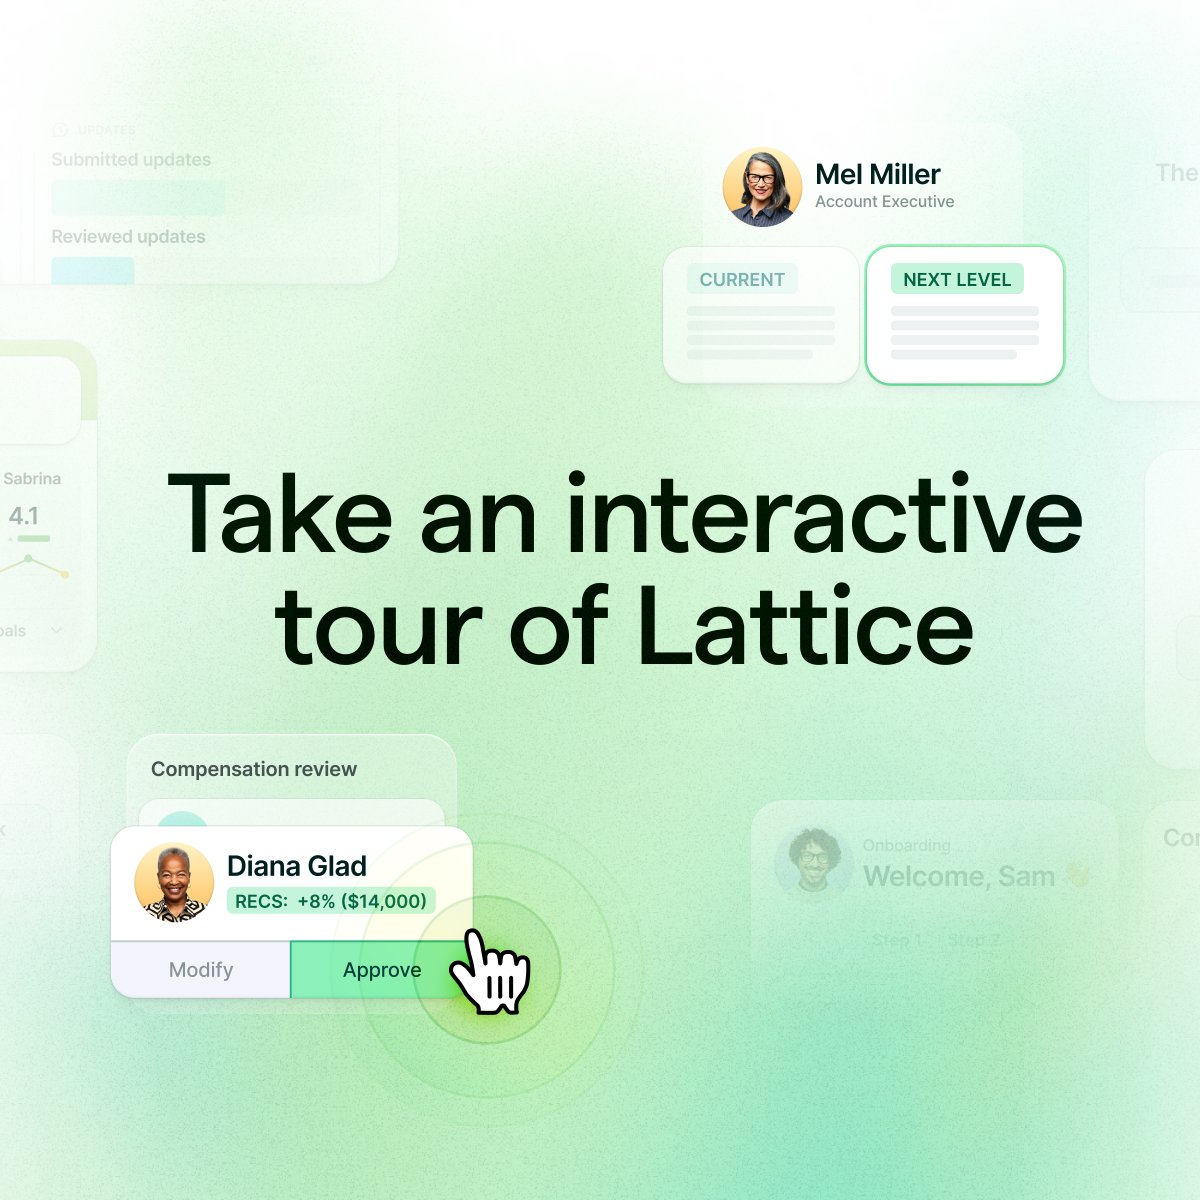 Want to see the Lattice People Platform in action? Take an interactive tour: bit.ly/3xiiODP